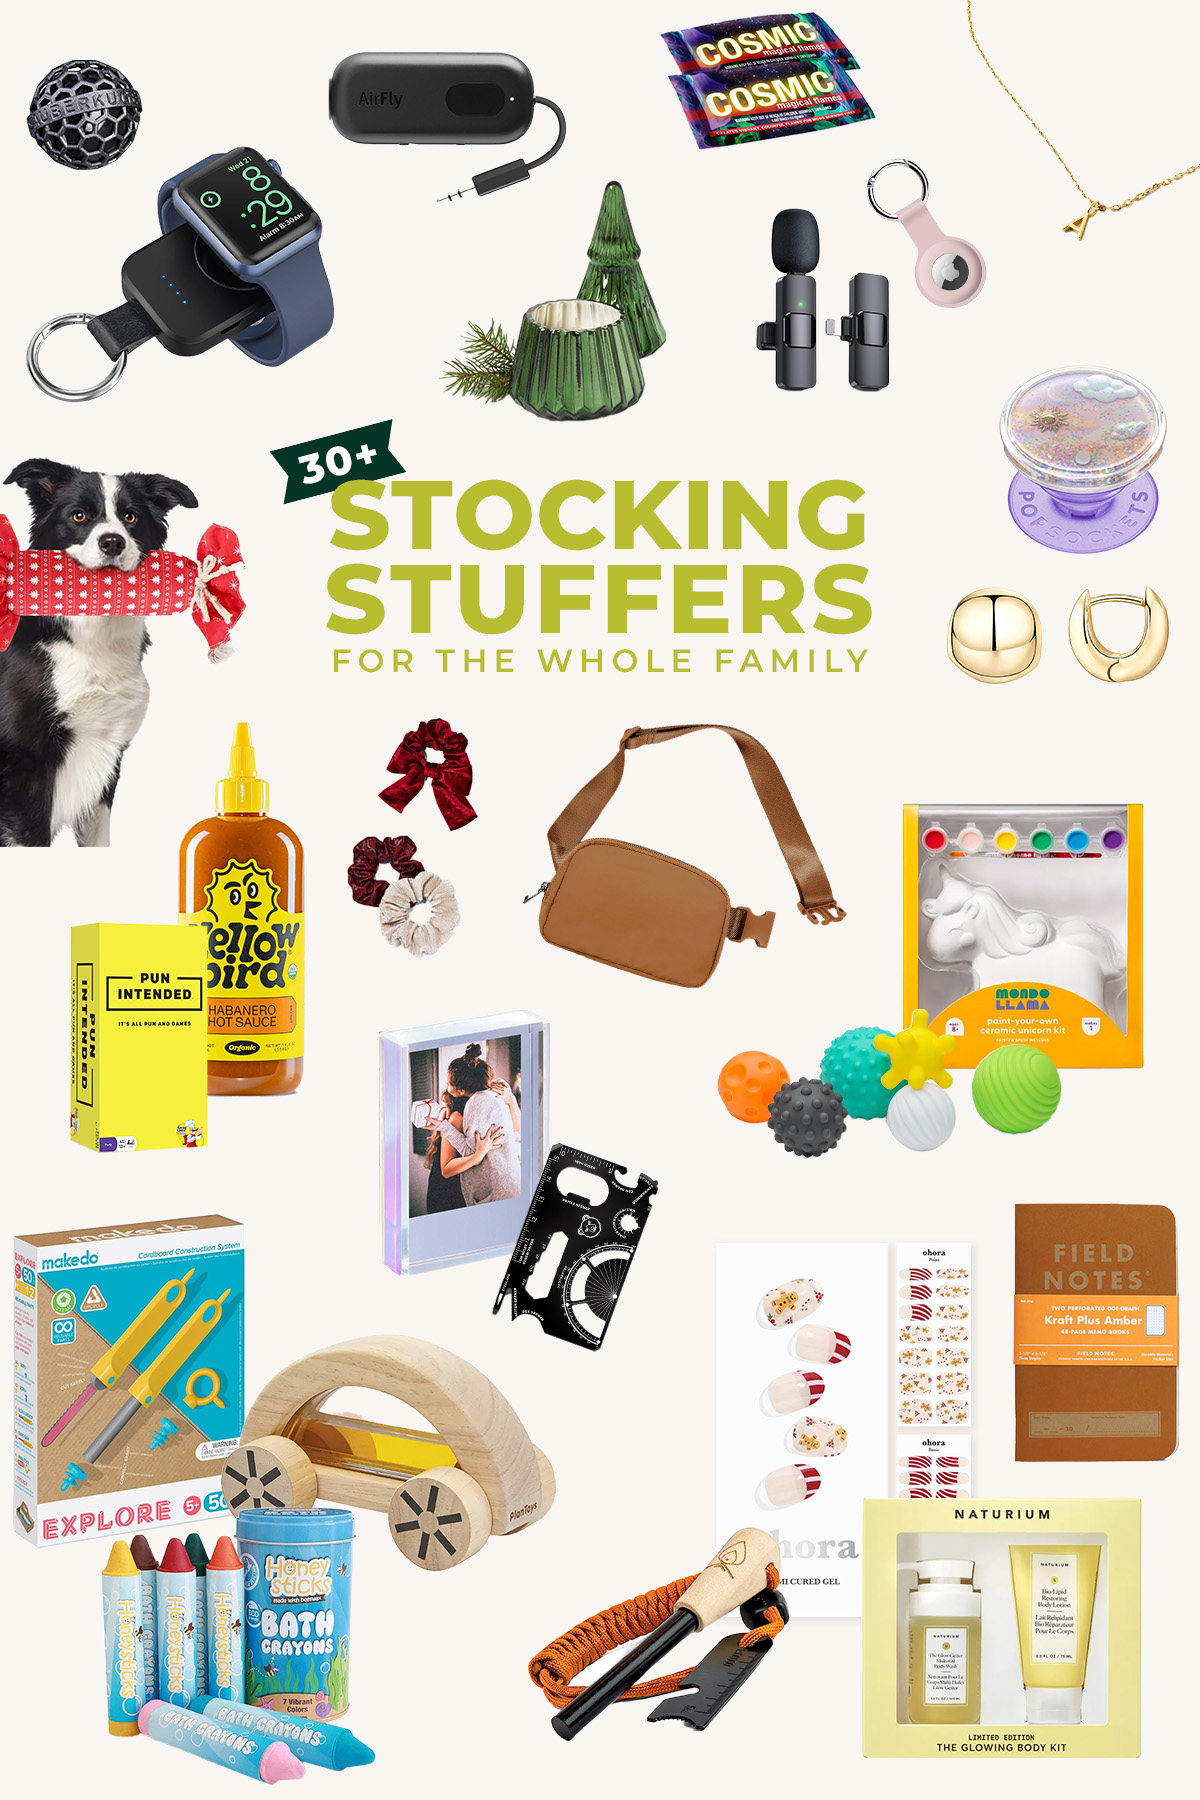 More than 30 creative stocking stuffer ideas for kids, all under